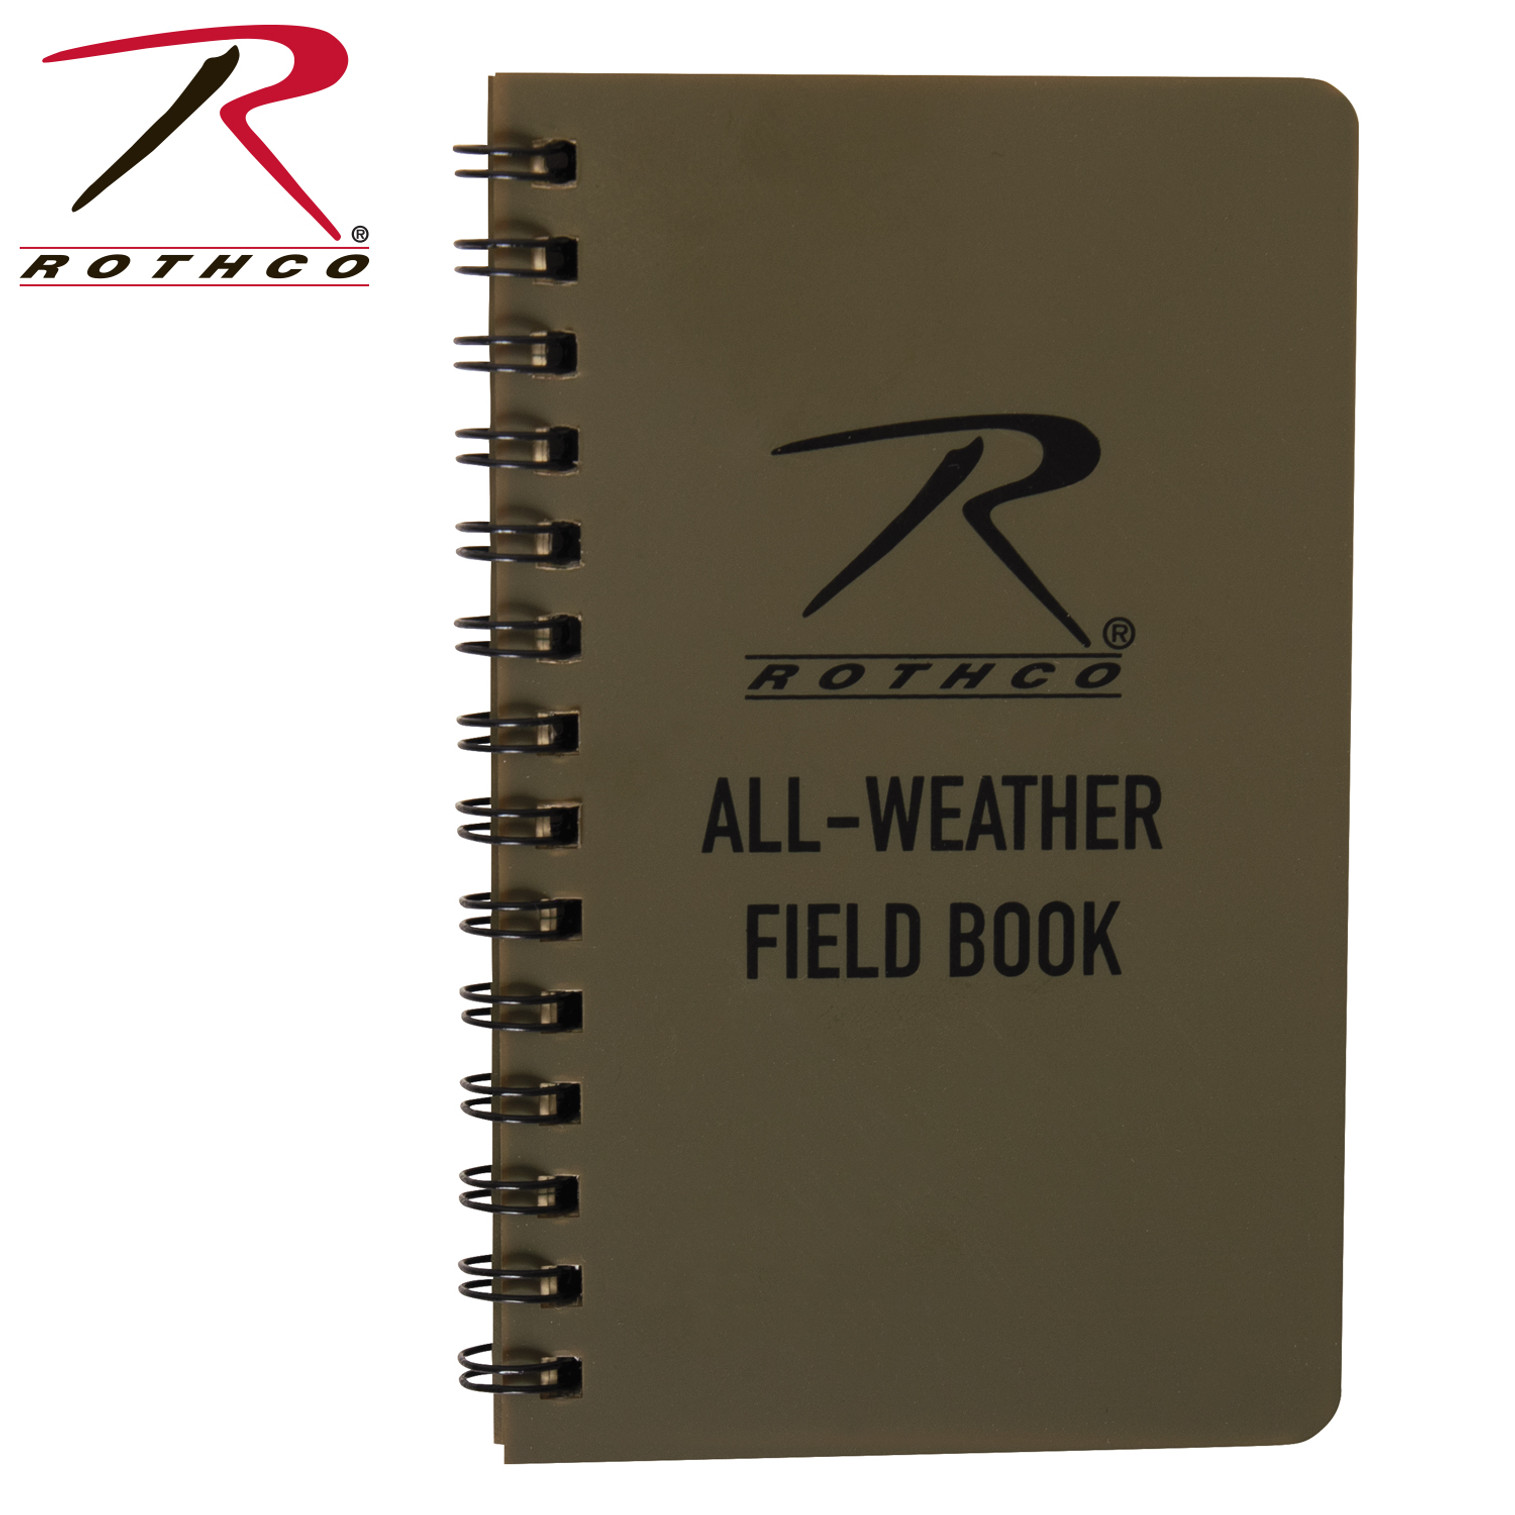 Rothco All Weather Waterproof Notebook - Coyote Brown